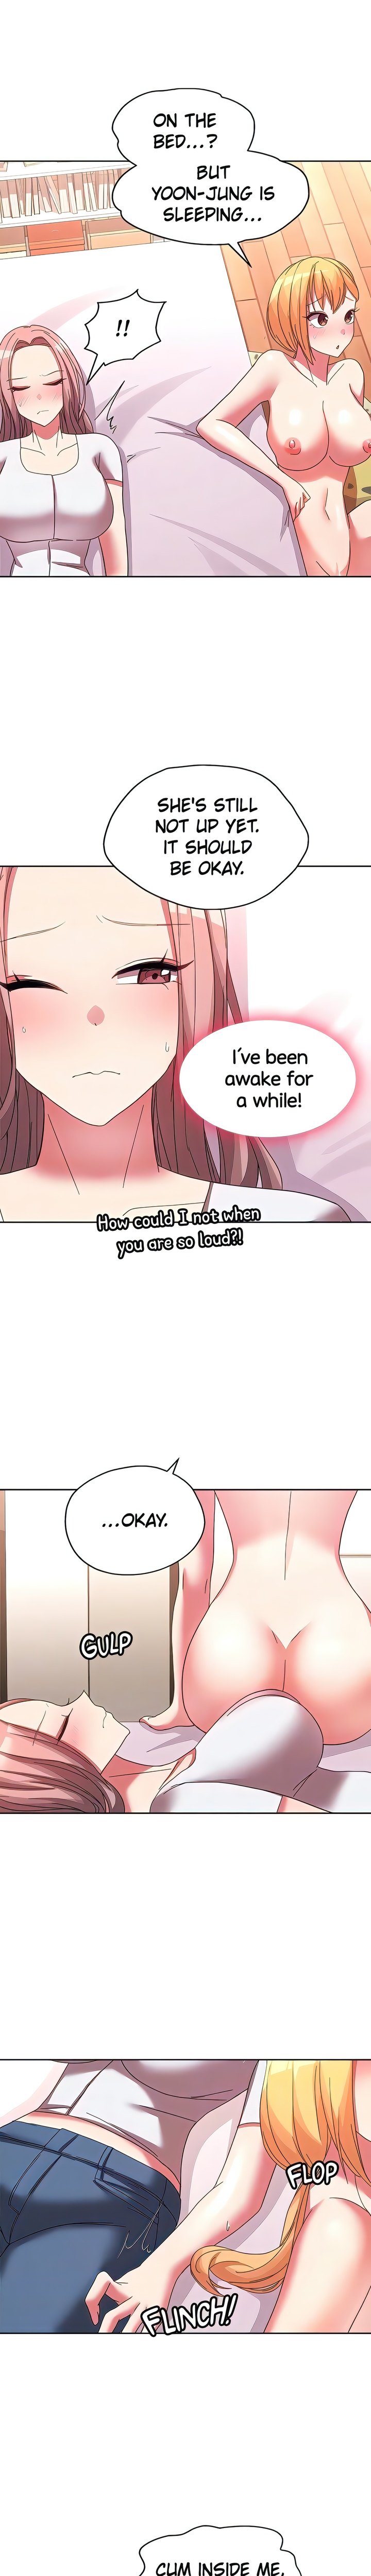 girls-i-used-to-teach-chap-34-7